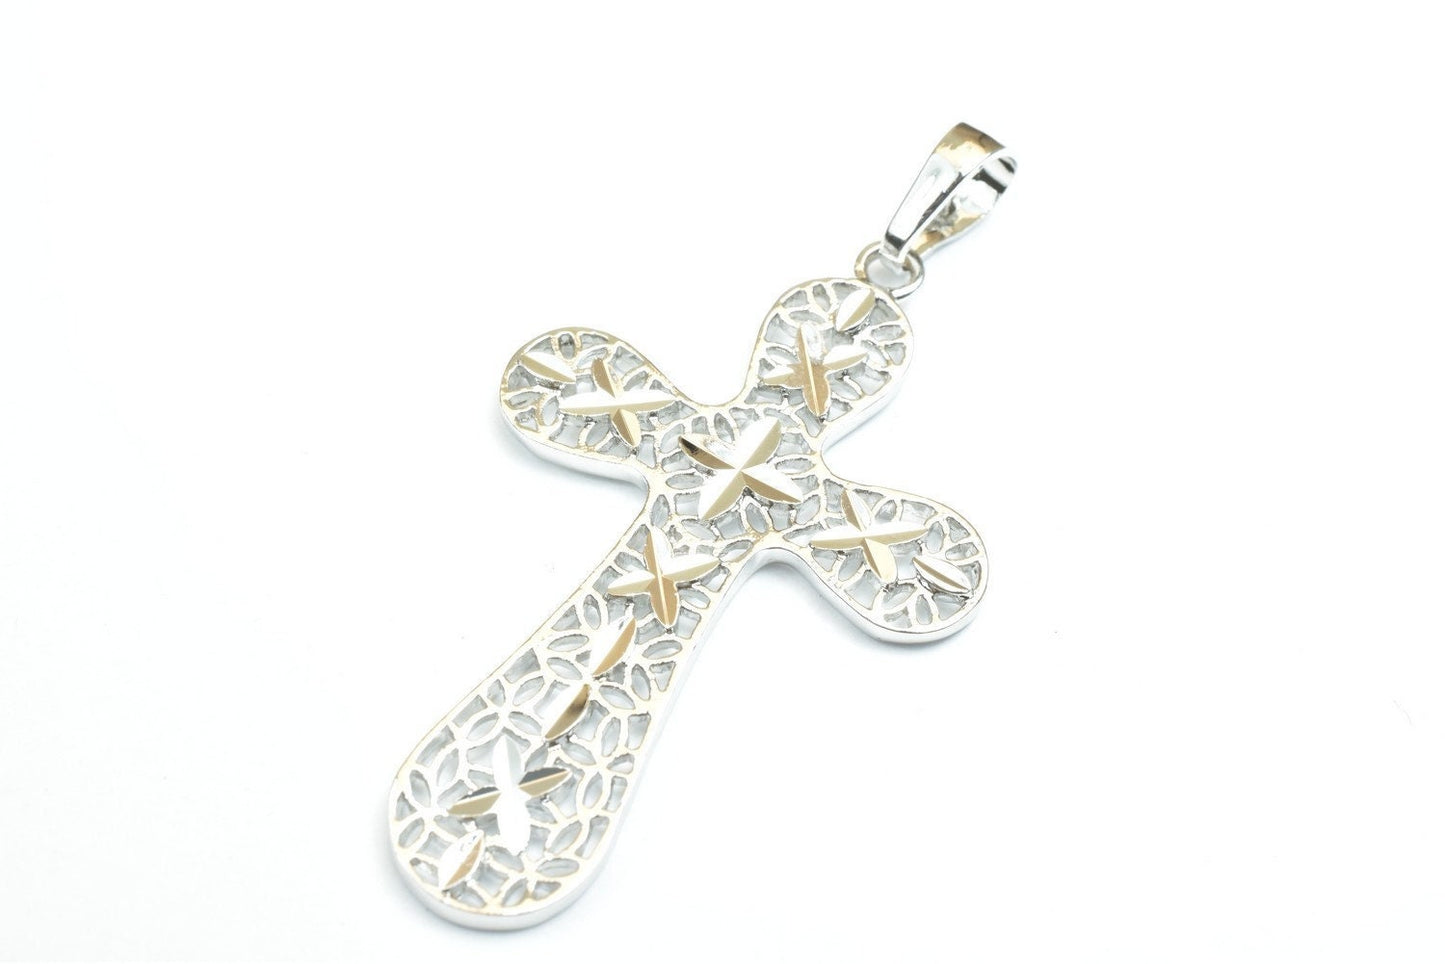 White as as gold filled* tarnish resistant cross pendant filigree rhodium plated charm size 43x26.5mm, thickness 2mm for jewelry making rp67